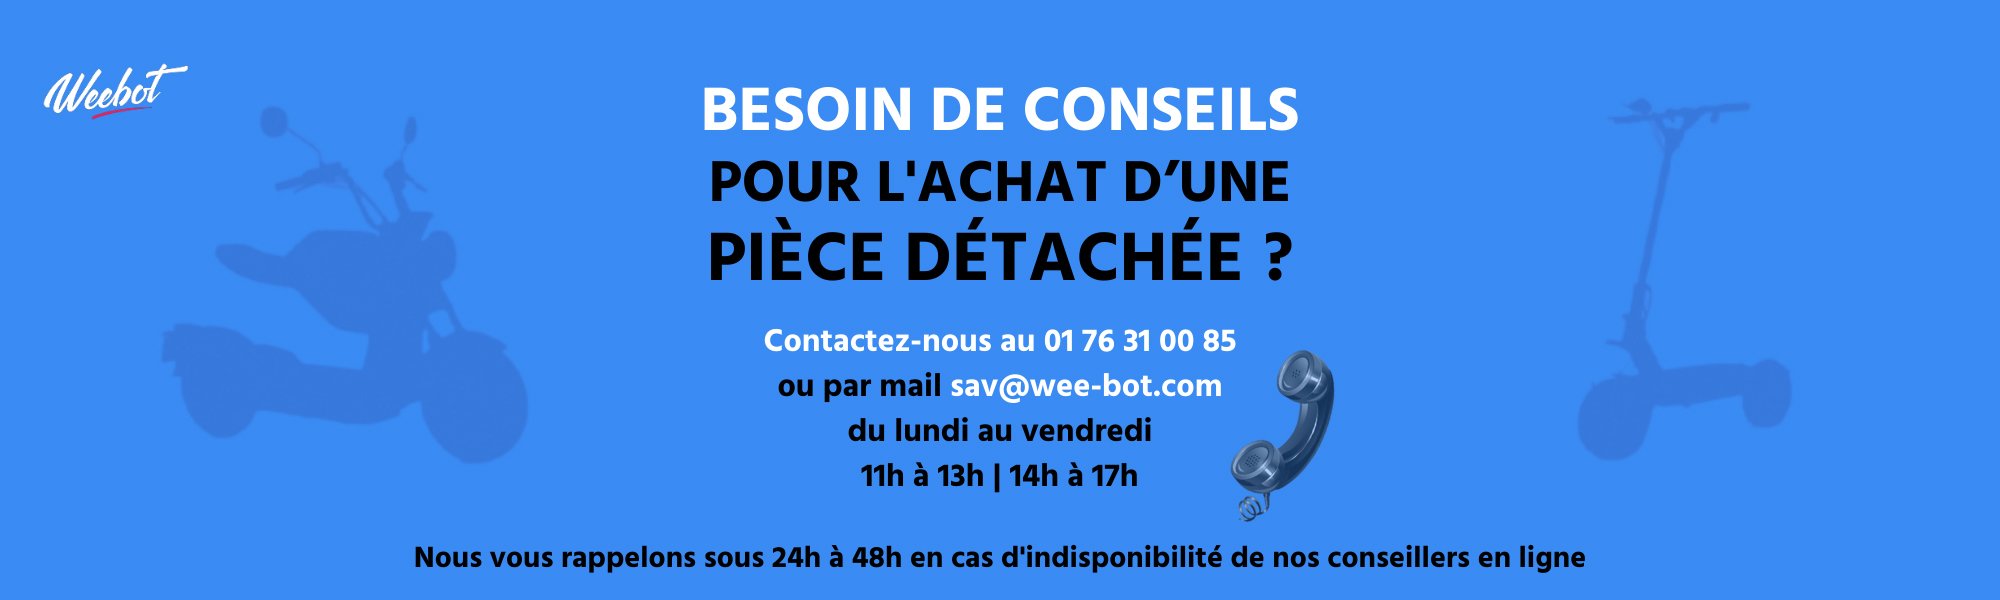 contact Weebot telephone pieces detachées 